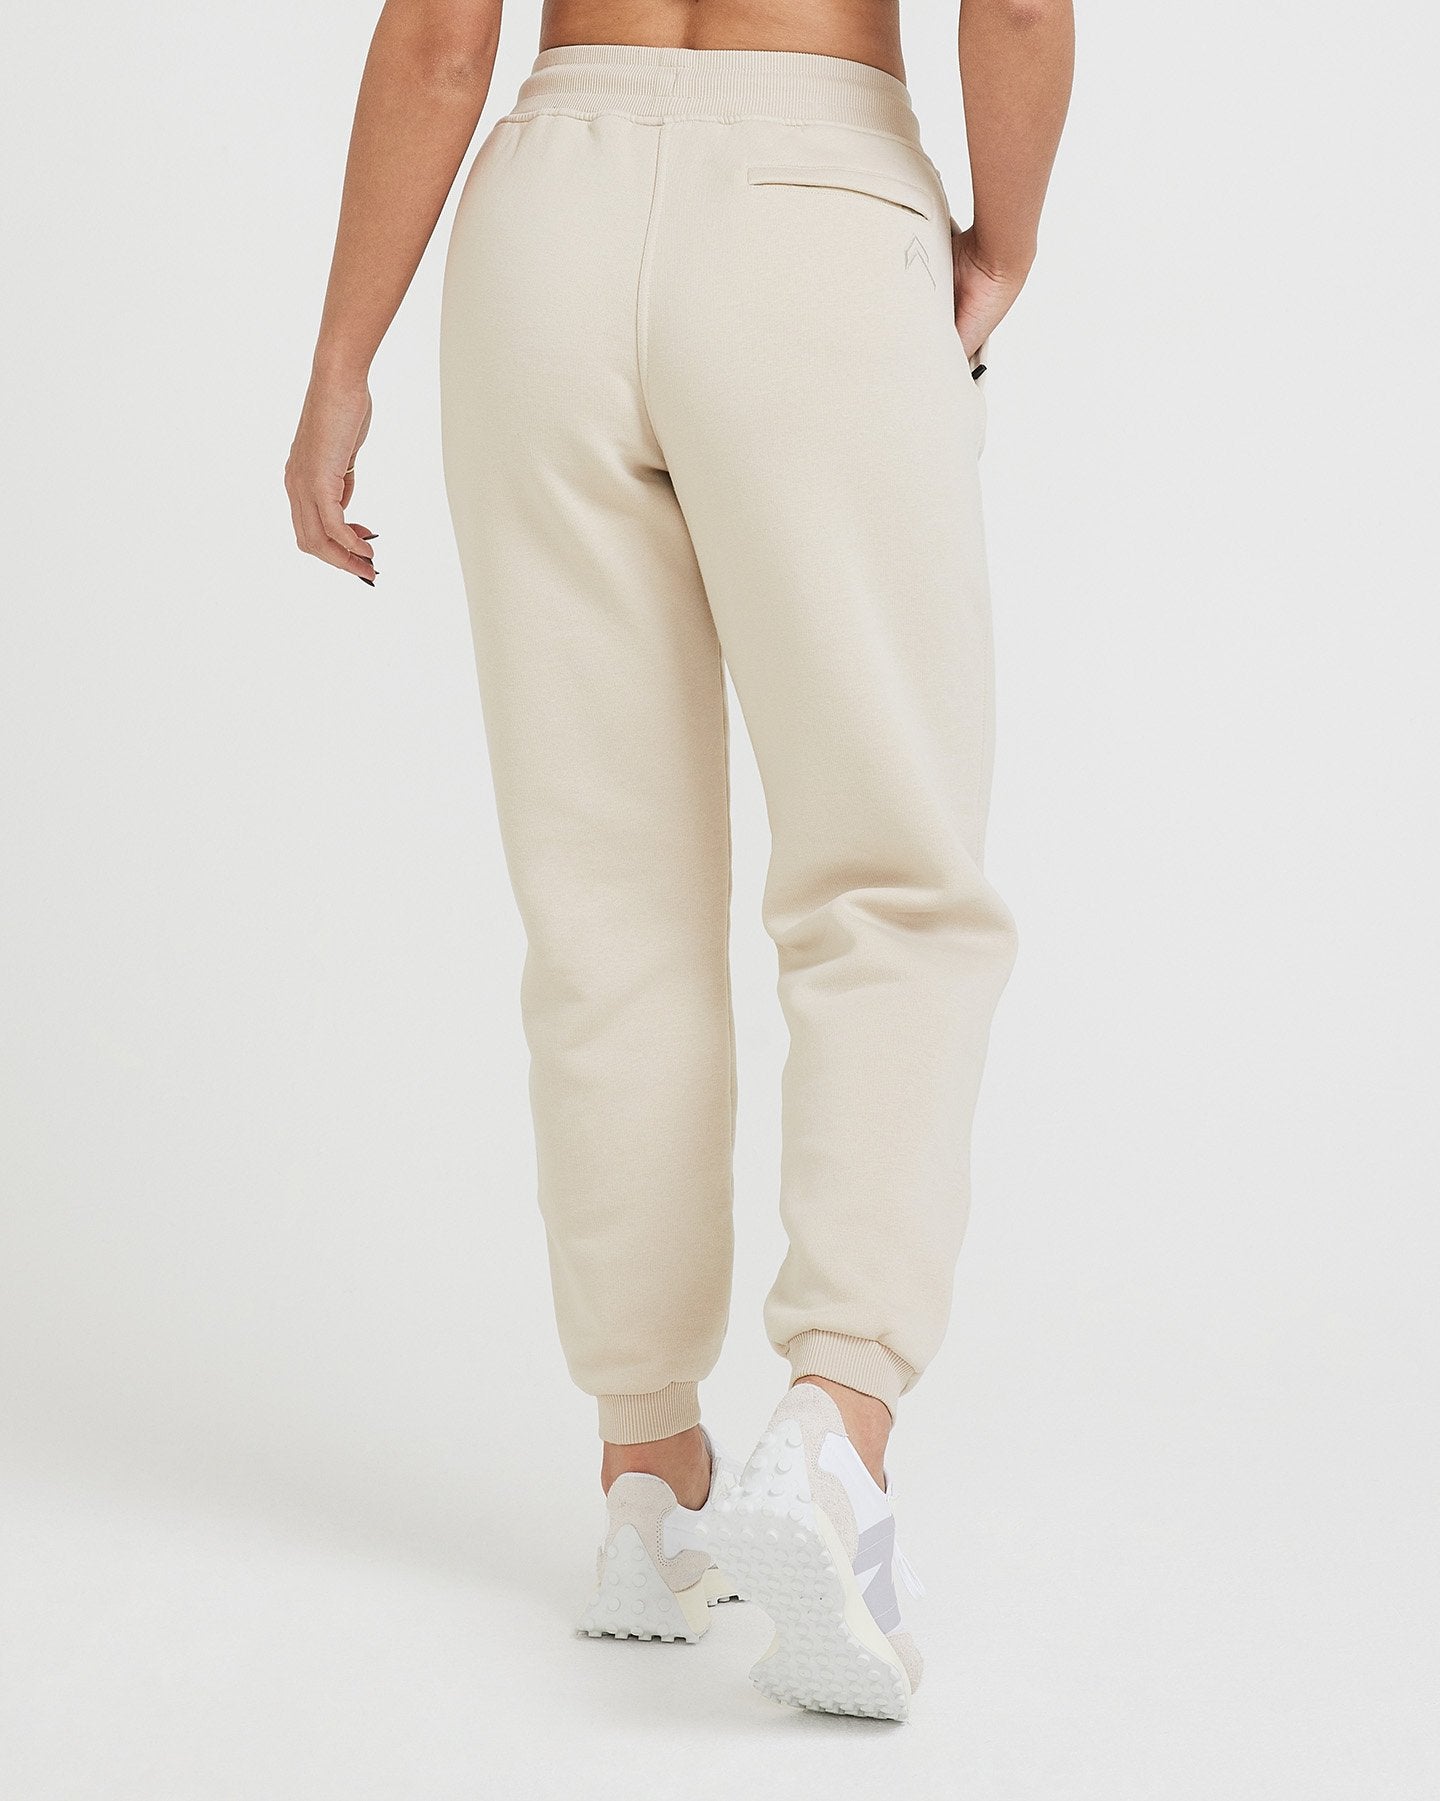 Women's Sandwash Joggers - All in Motion Brown L